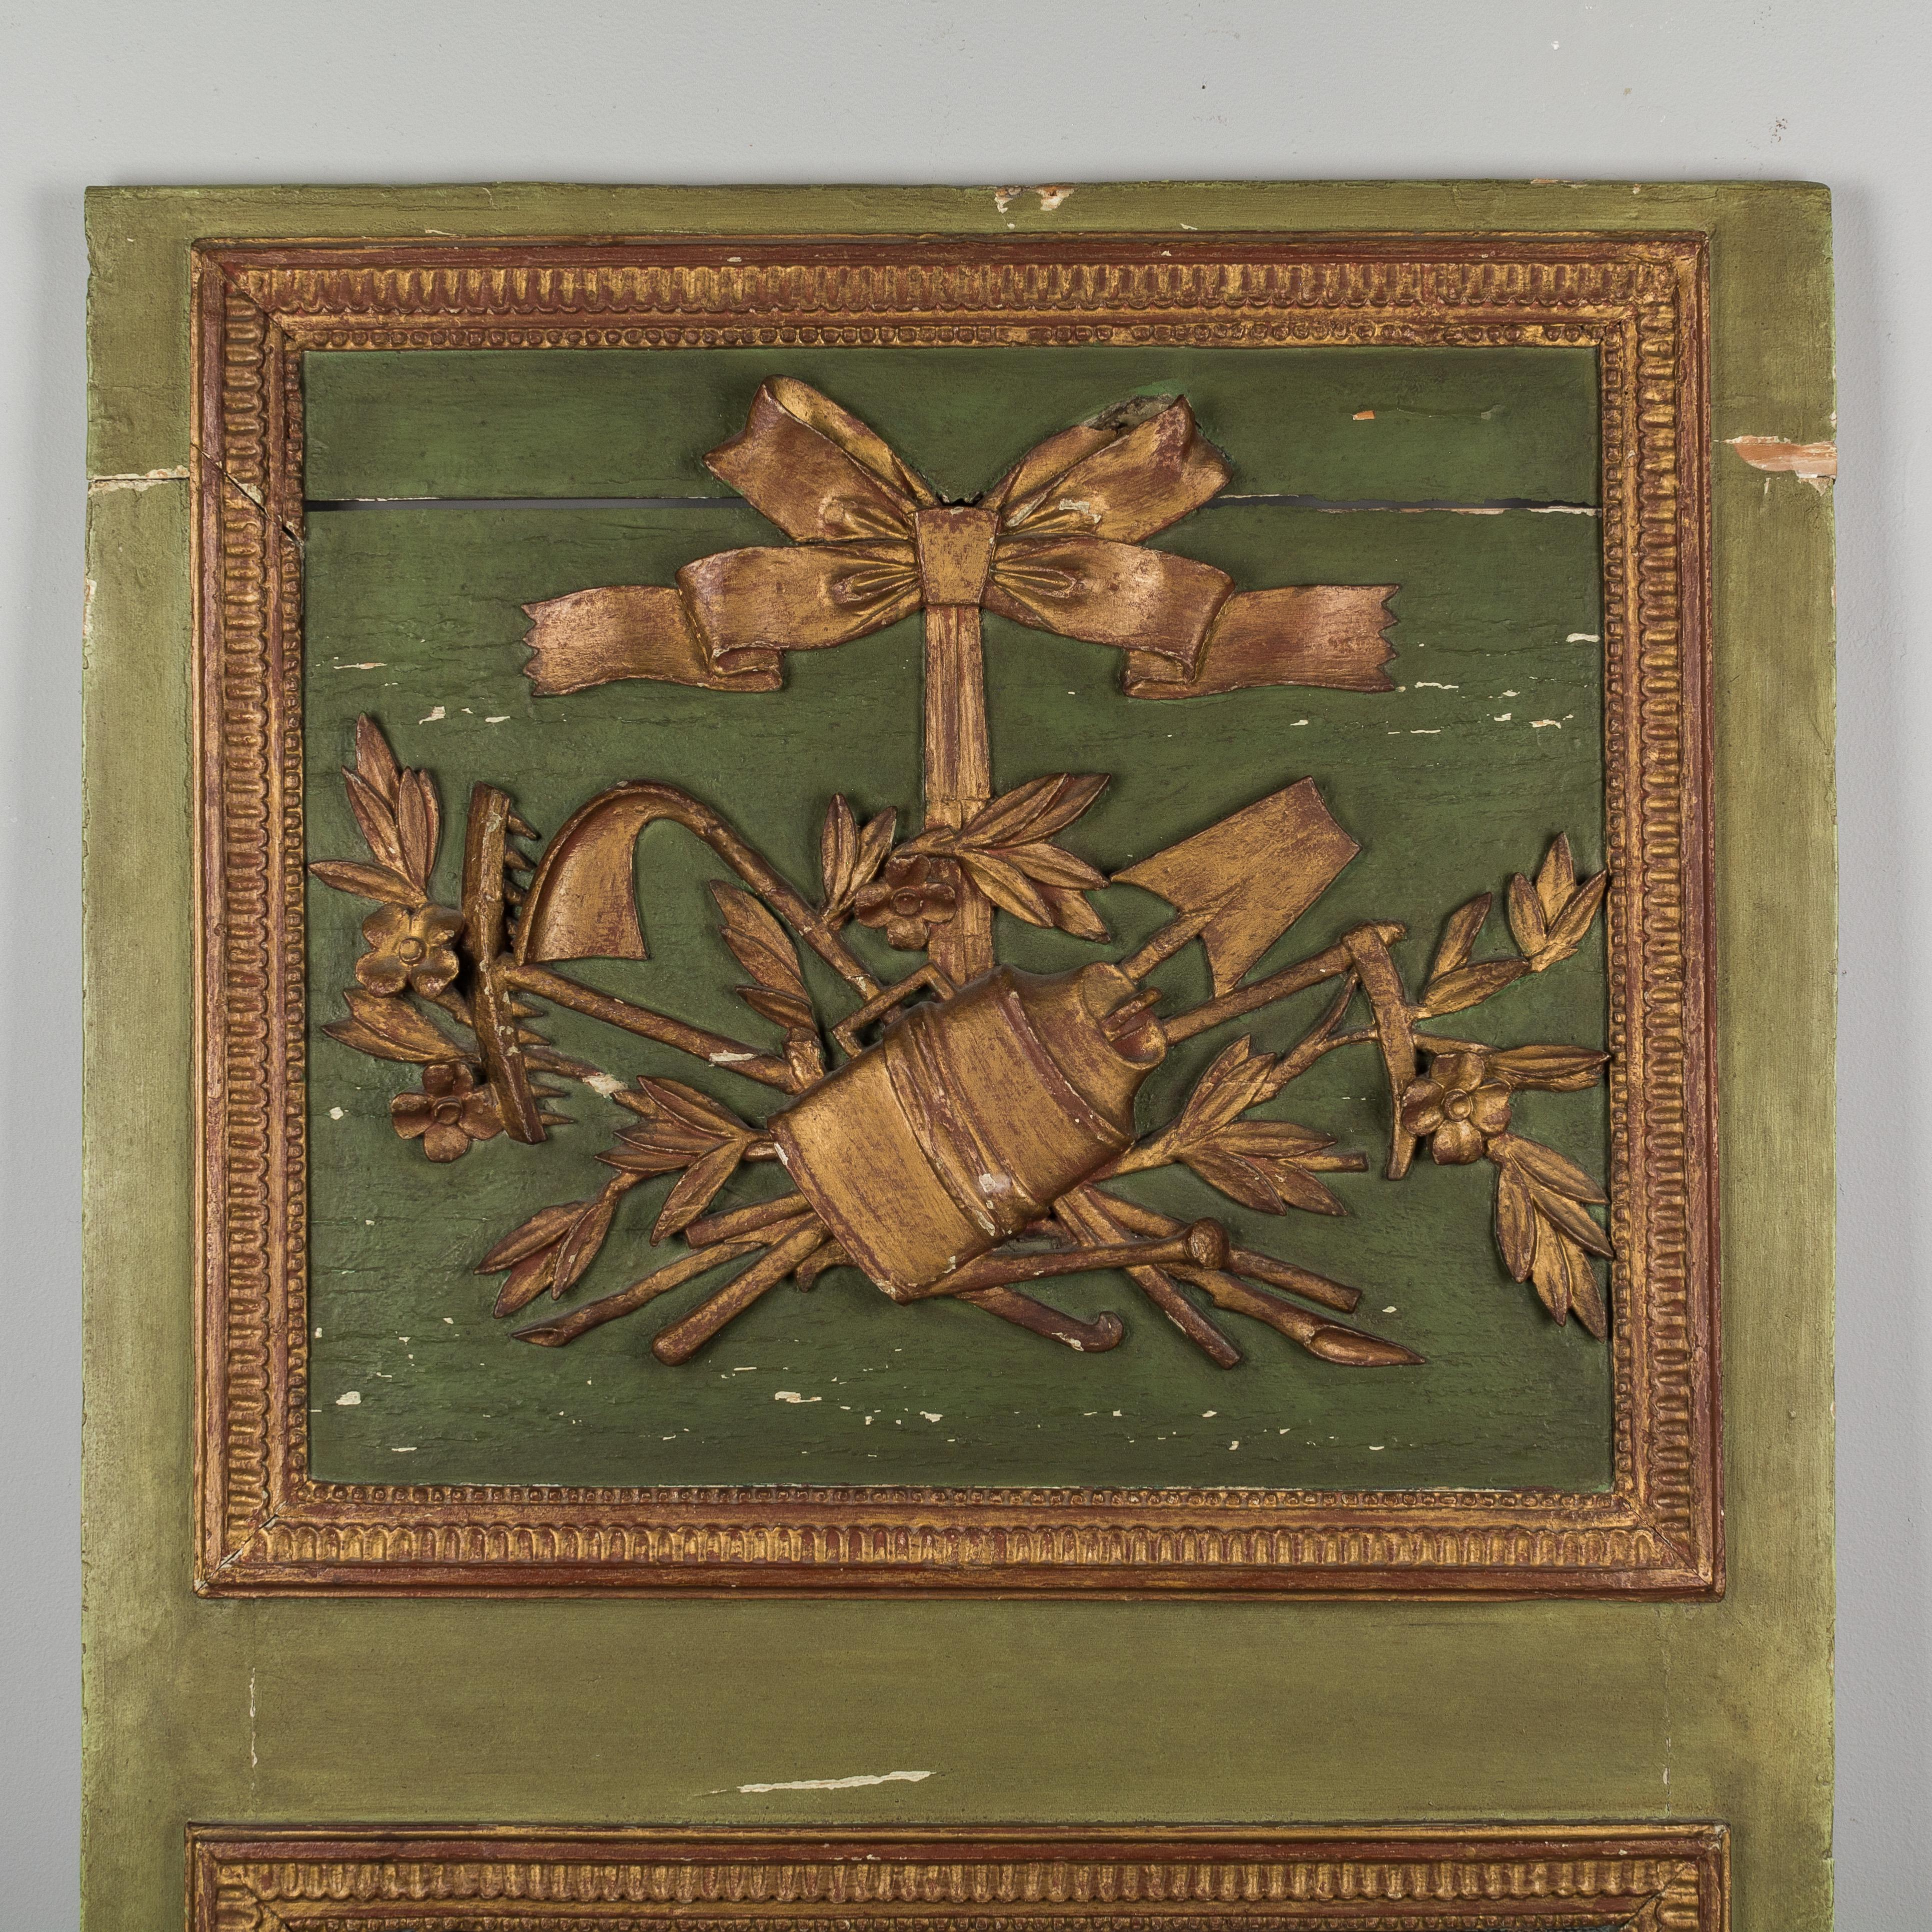 A lovely early 19th century French Louis XVI style trumeau with green parcel gilt frame and carved giltwood relief depicting gardening or farming tools with a large ribbon tied in a bow, flowers, a watering can, rake, and shovels. Perhaps from a sun